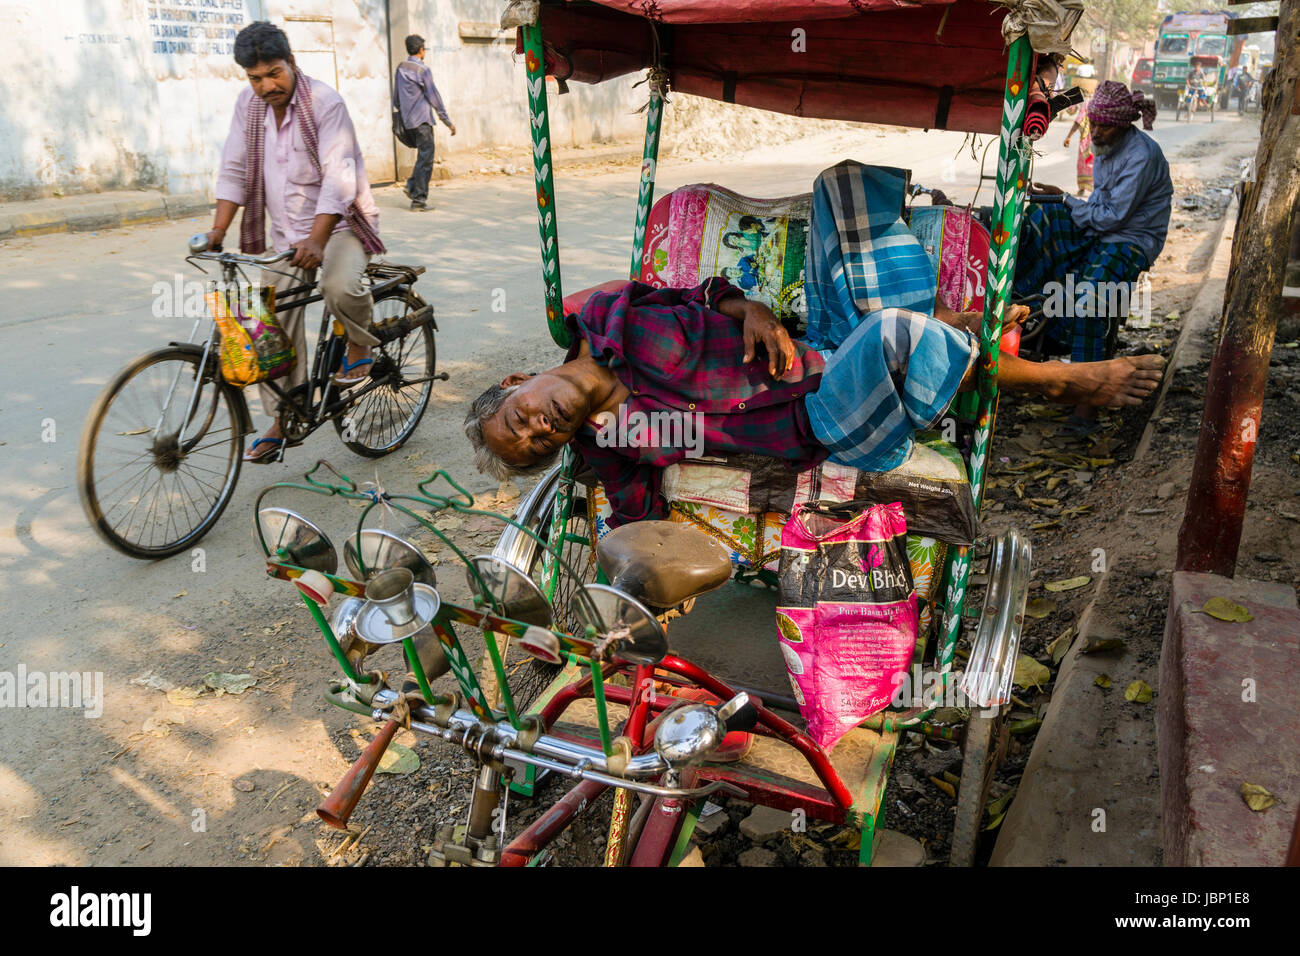 A man is sleeping on his cycle rickshaw on a road in the suburb New Market Stock Photo